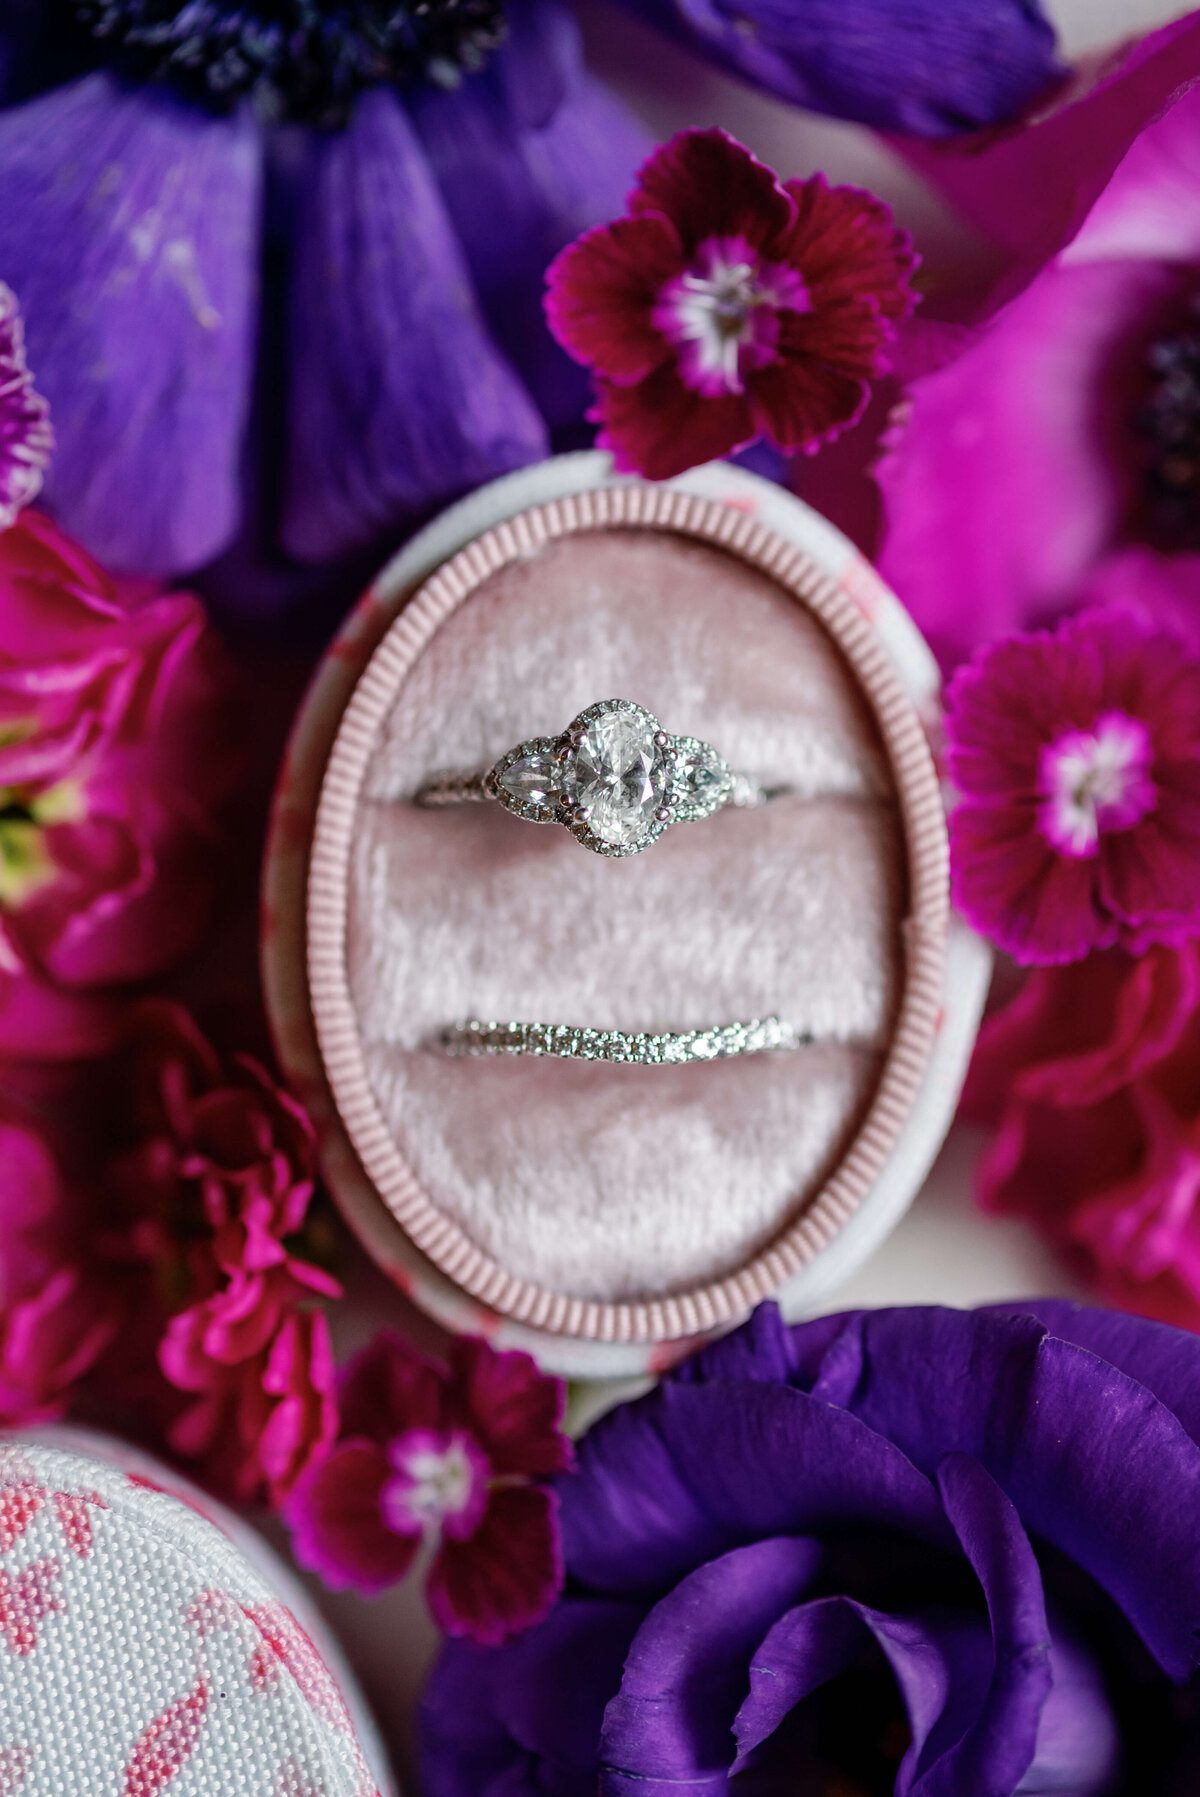 Wedding rings surrounded by colorful florals